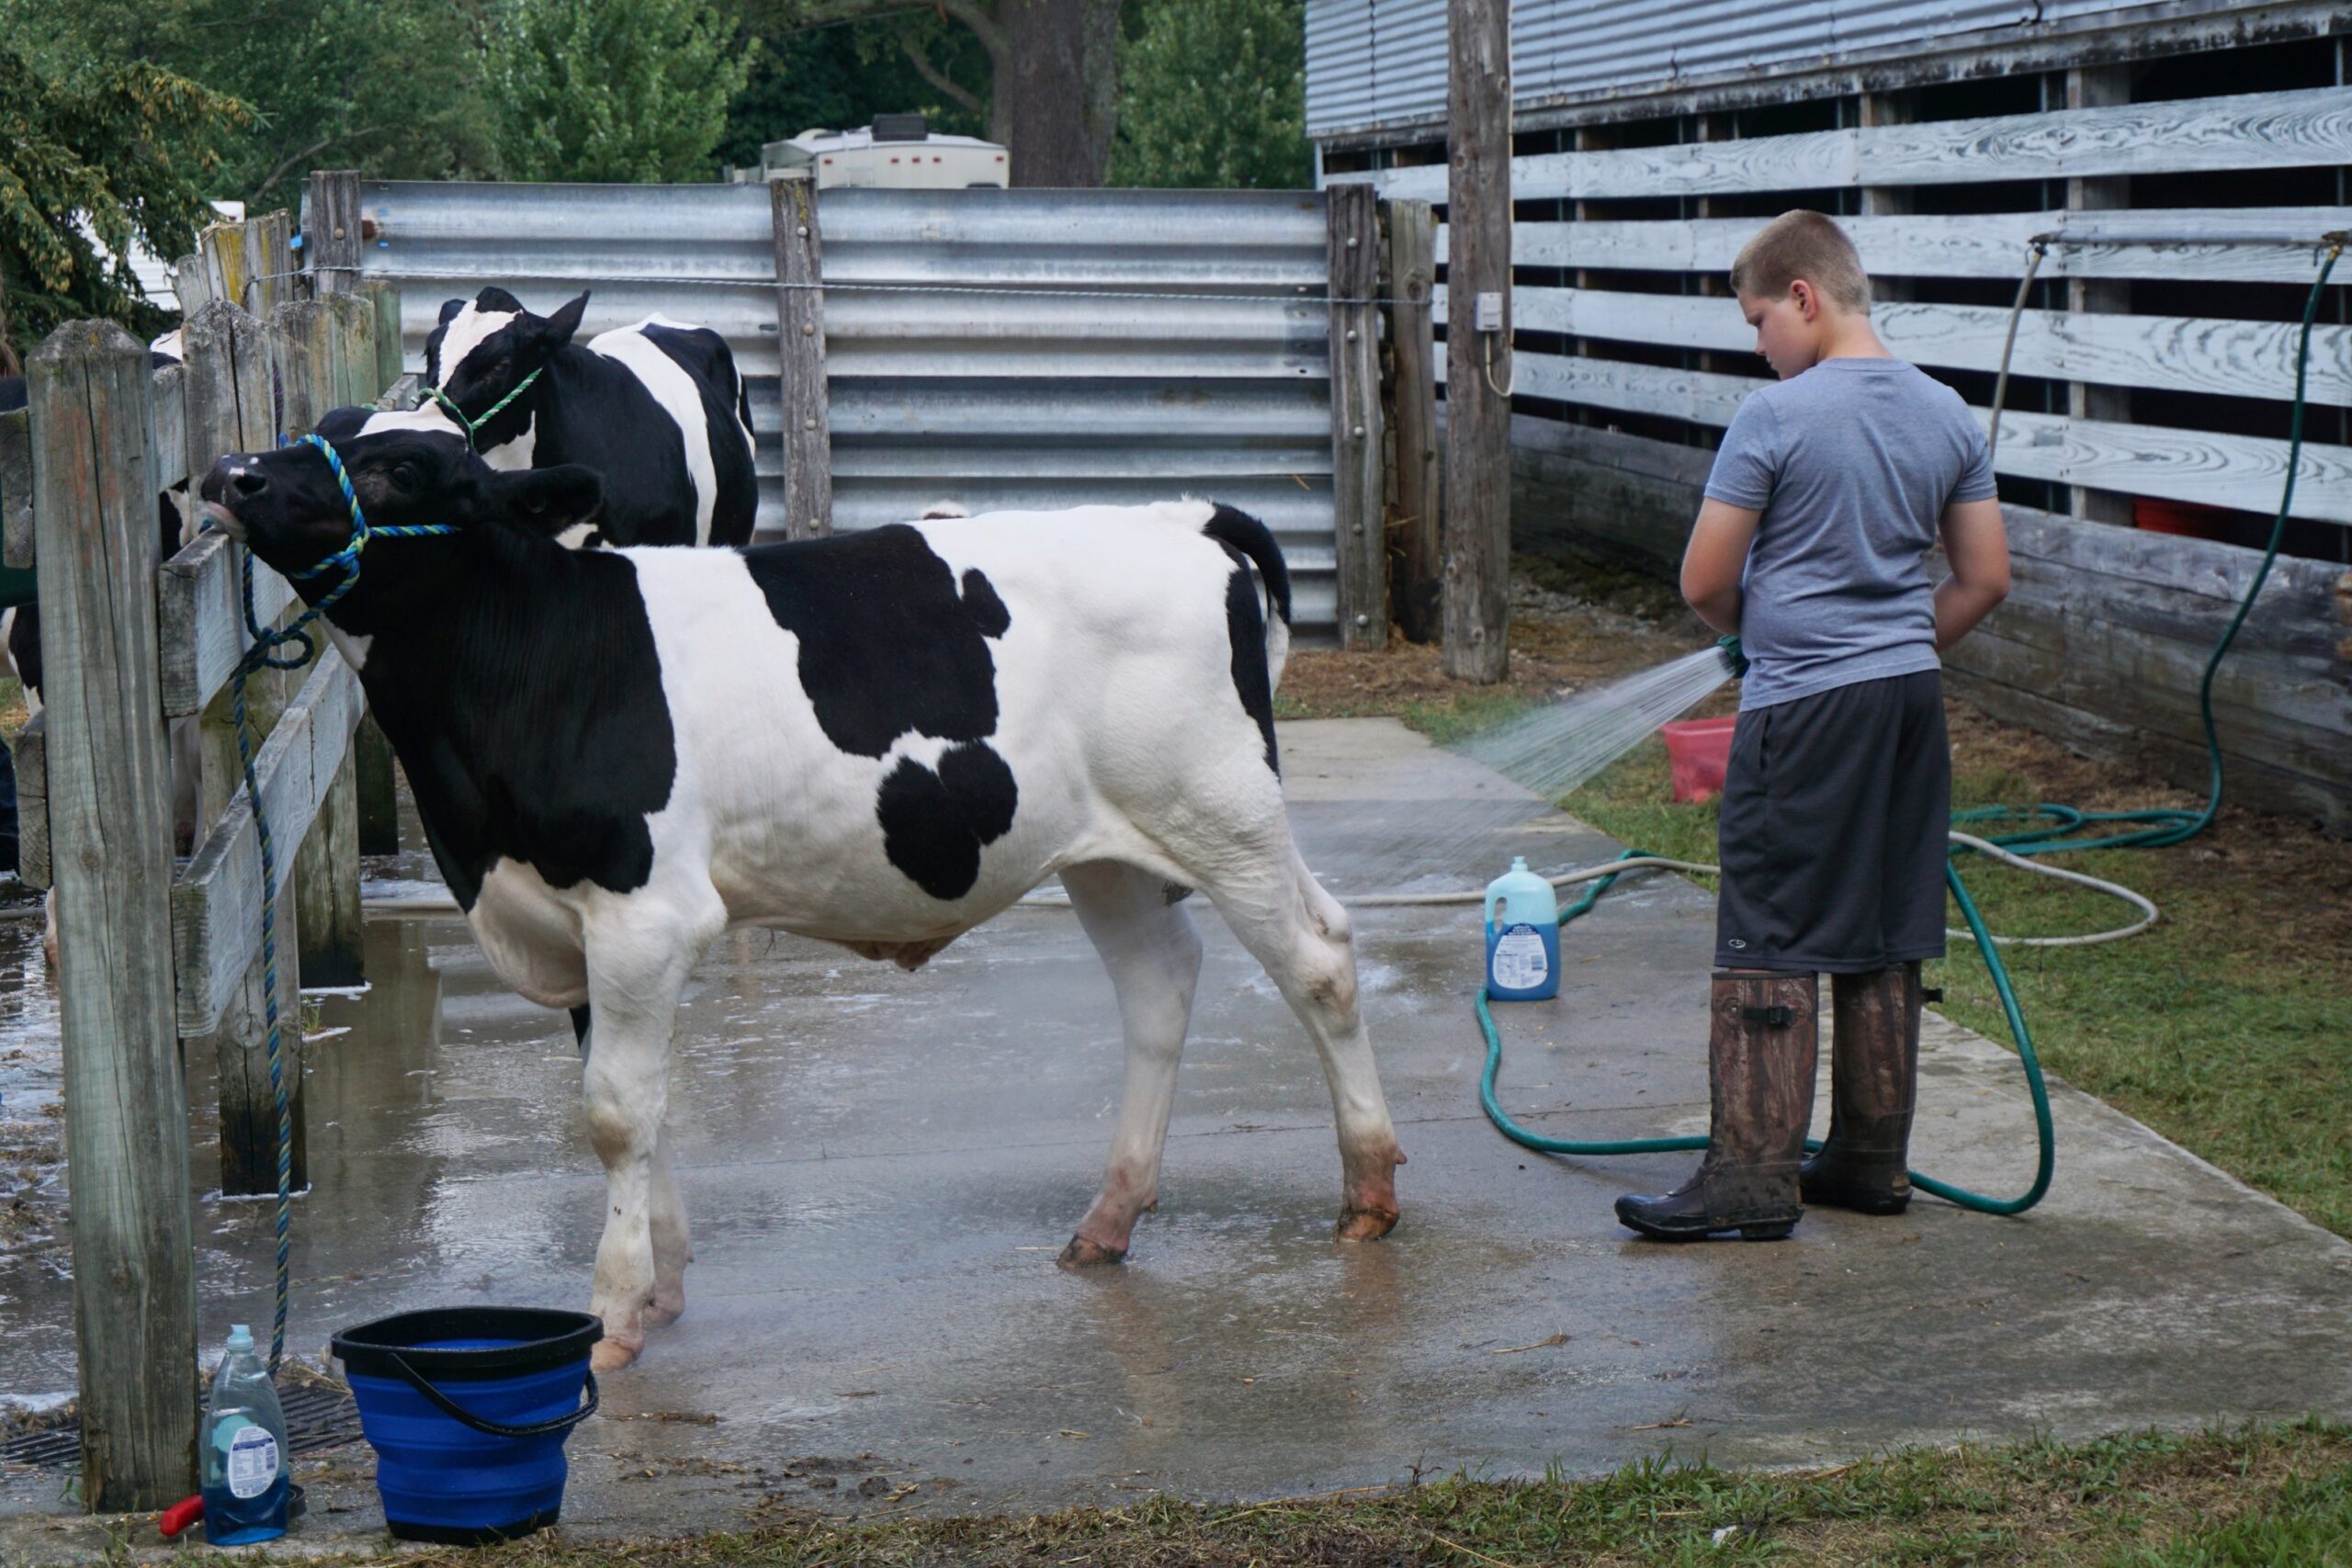 4H member washing his cow at the state fair after raising money with a cookbook fundraiser